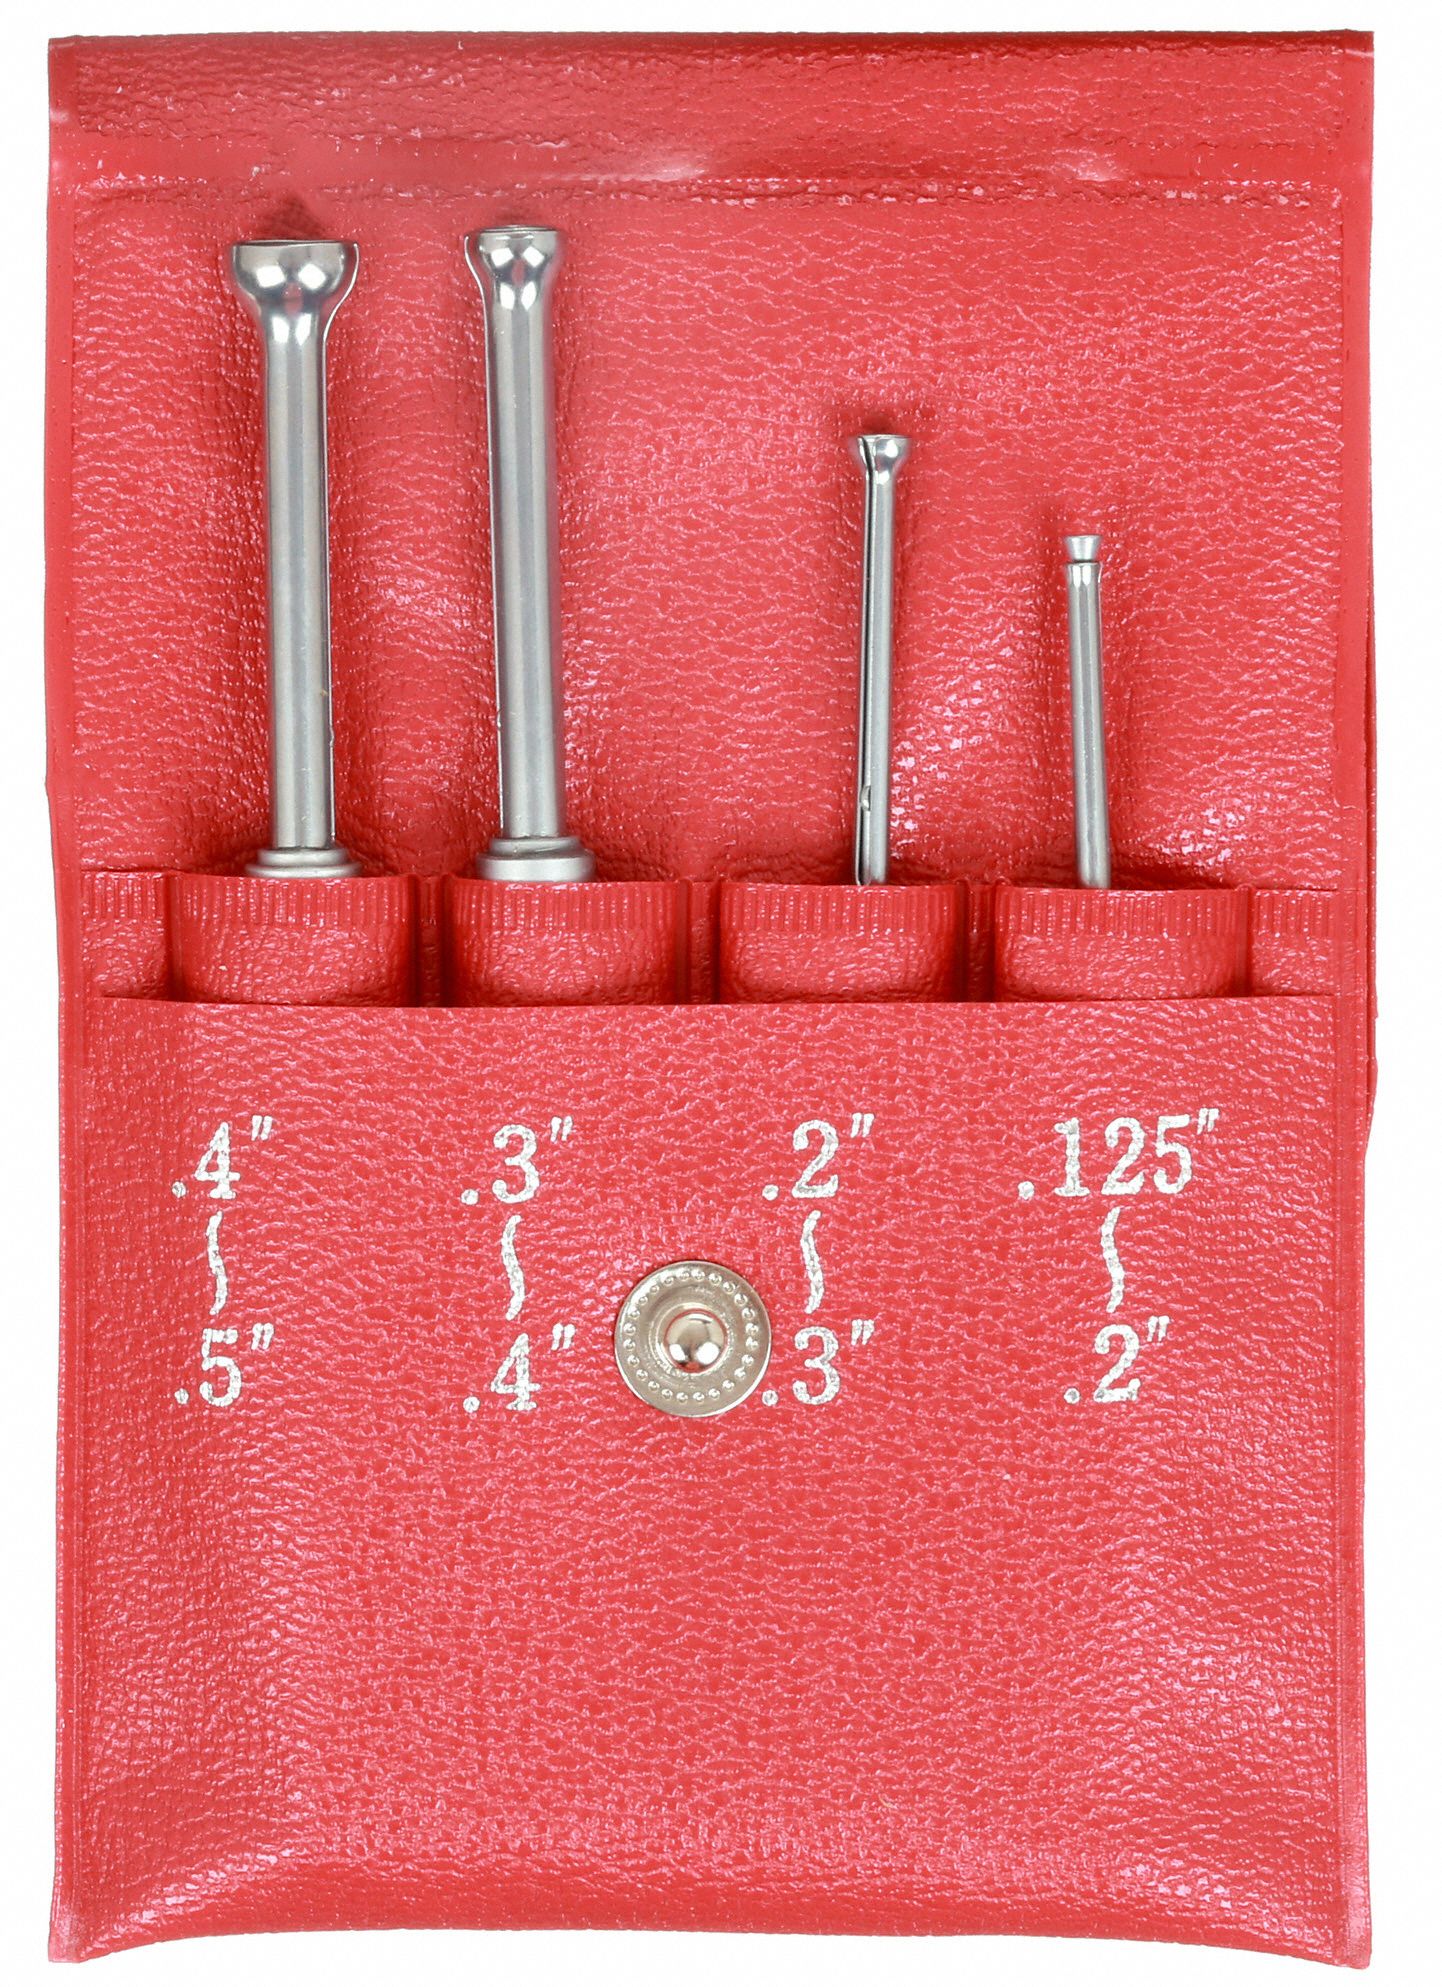 Mitutoyo 154-901 H 4pc Small Hole Gage Set for sale online 